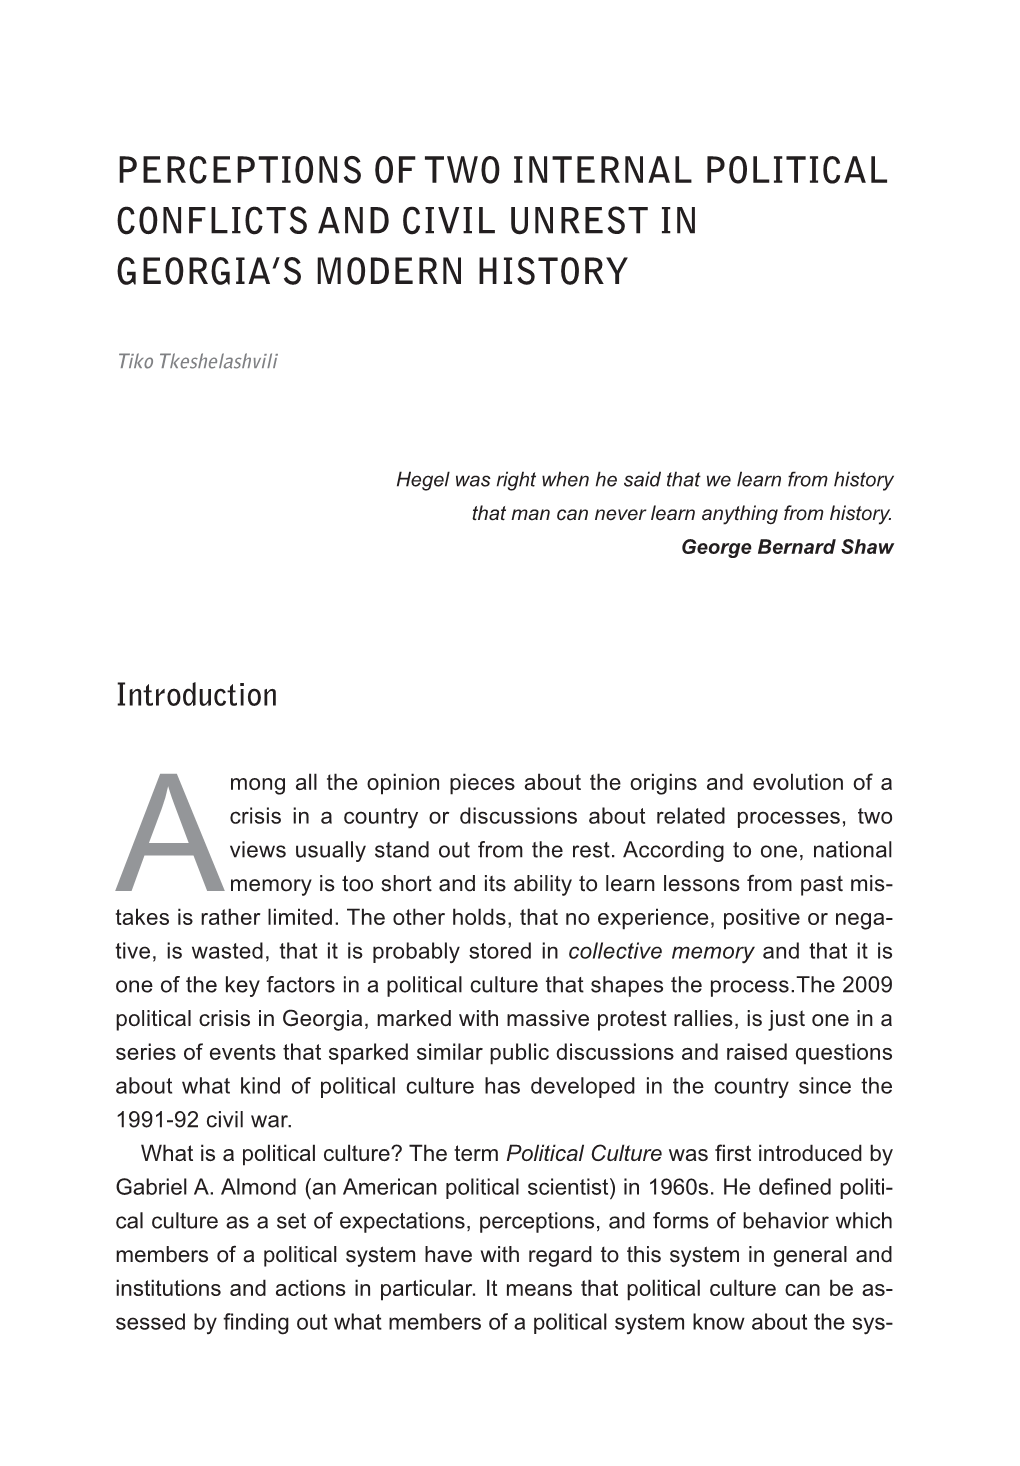 Perceptions of Two Internal Political Conflicts and Civil Unrest in Georgia's Modern History